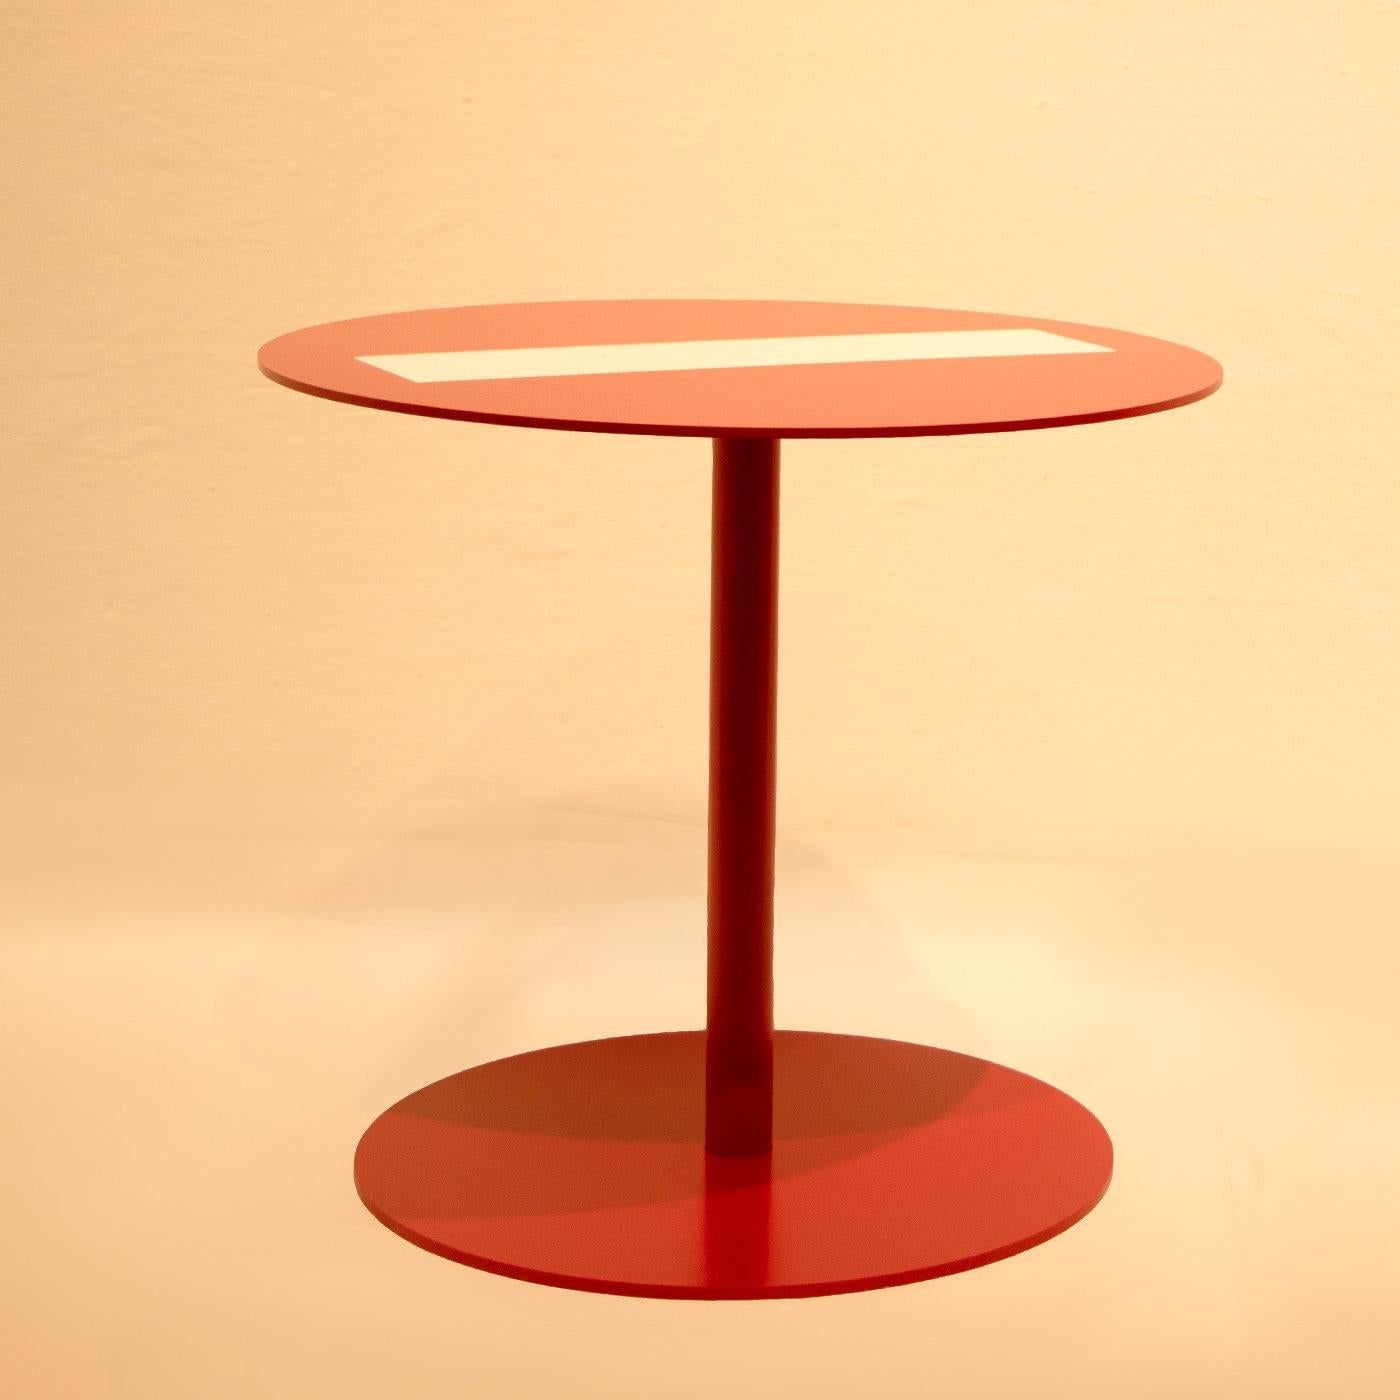 The perfect accent piece for adding artful appeal and character to any room, this original coffee table features a bright red iron pedestal base and round top reproducing a 